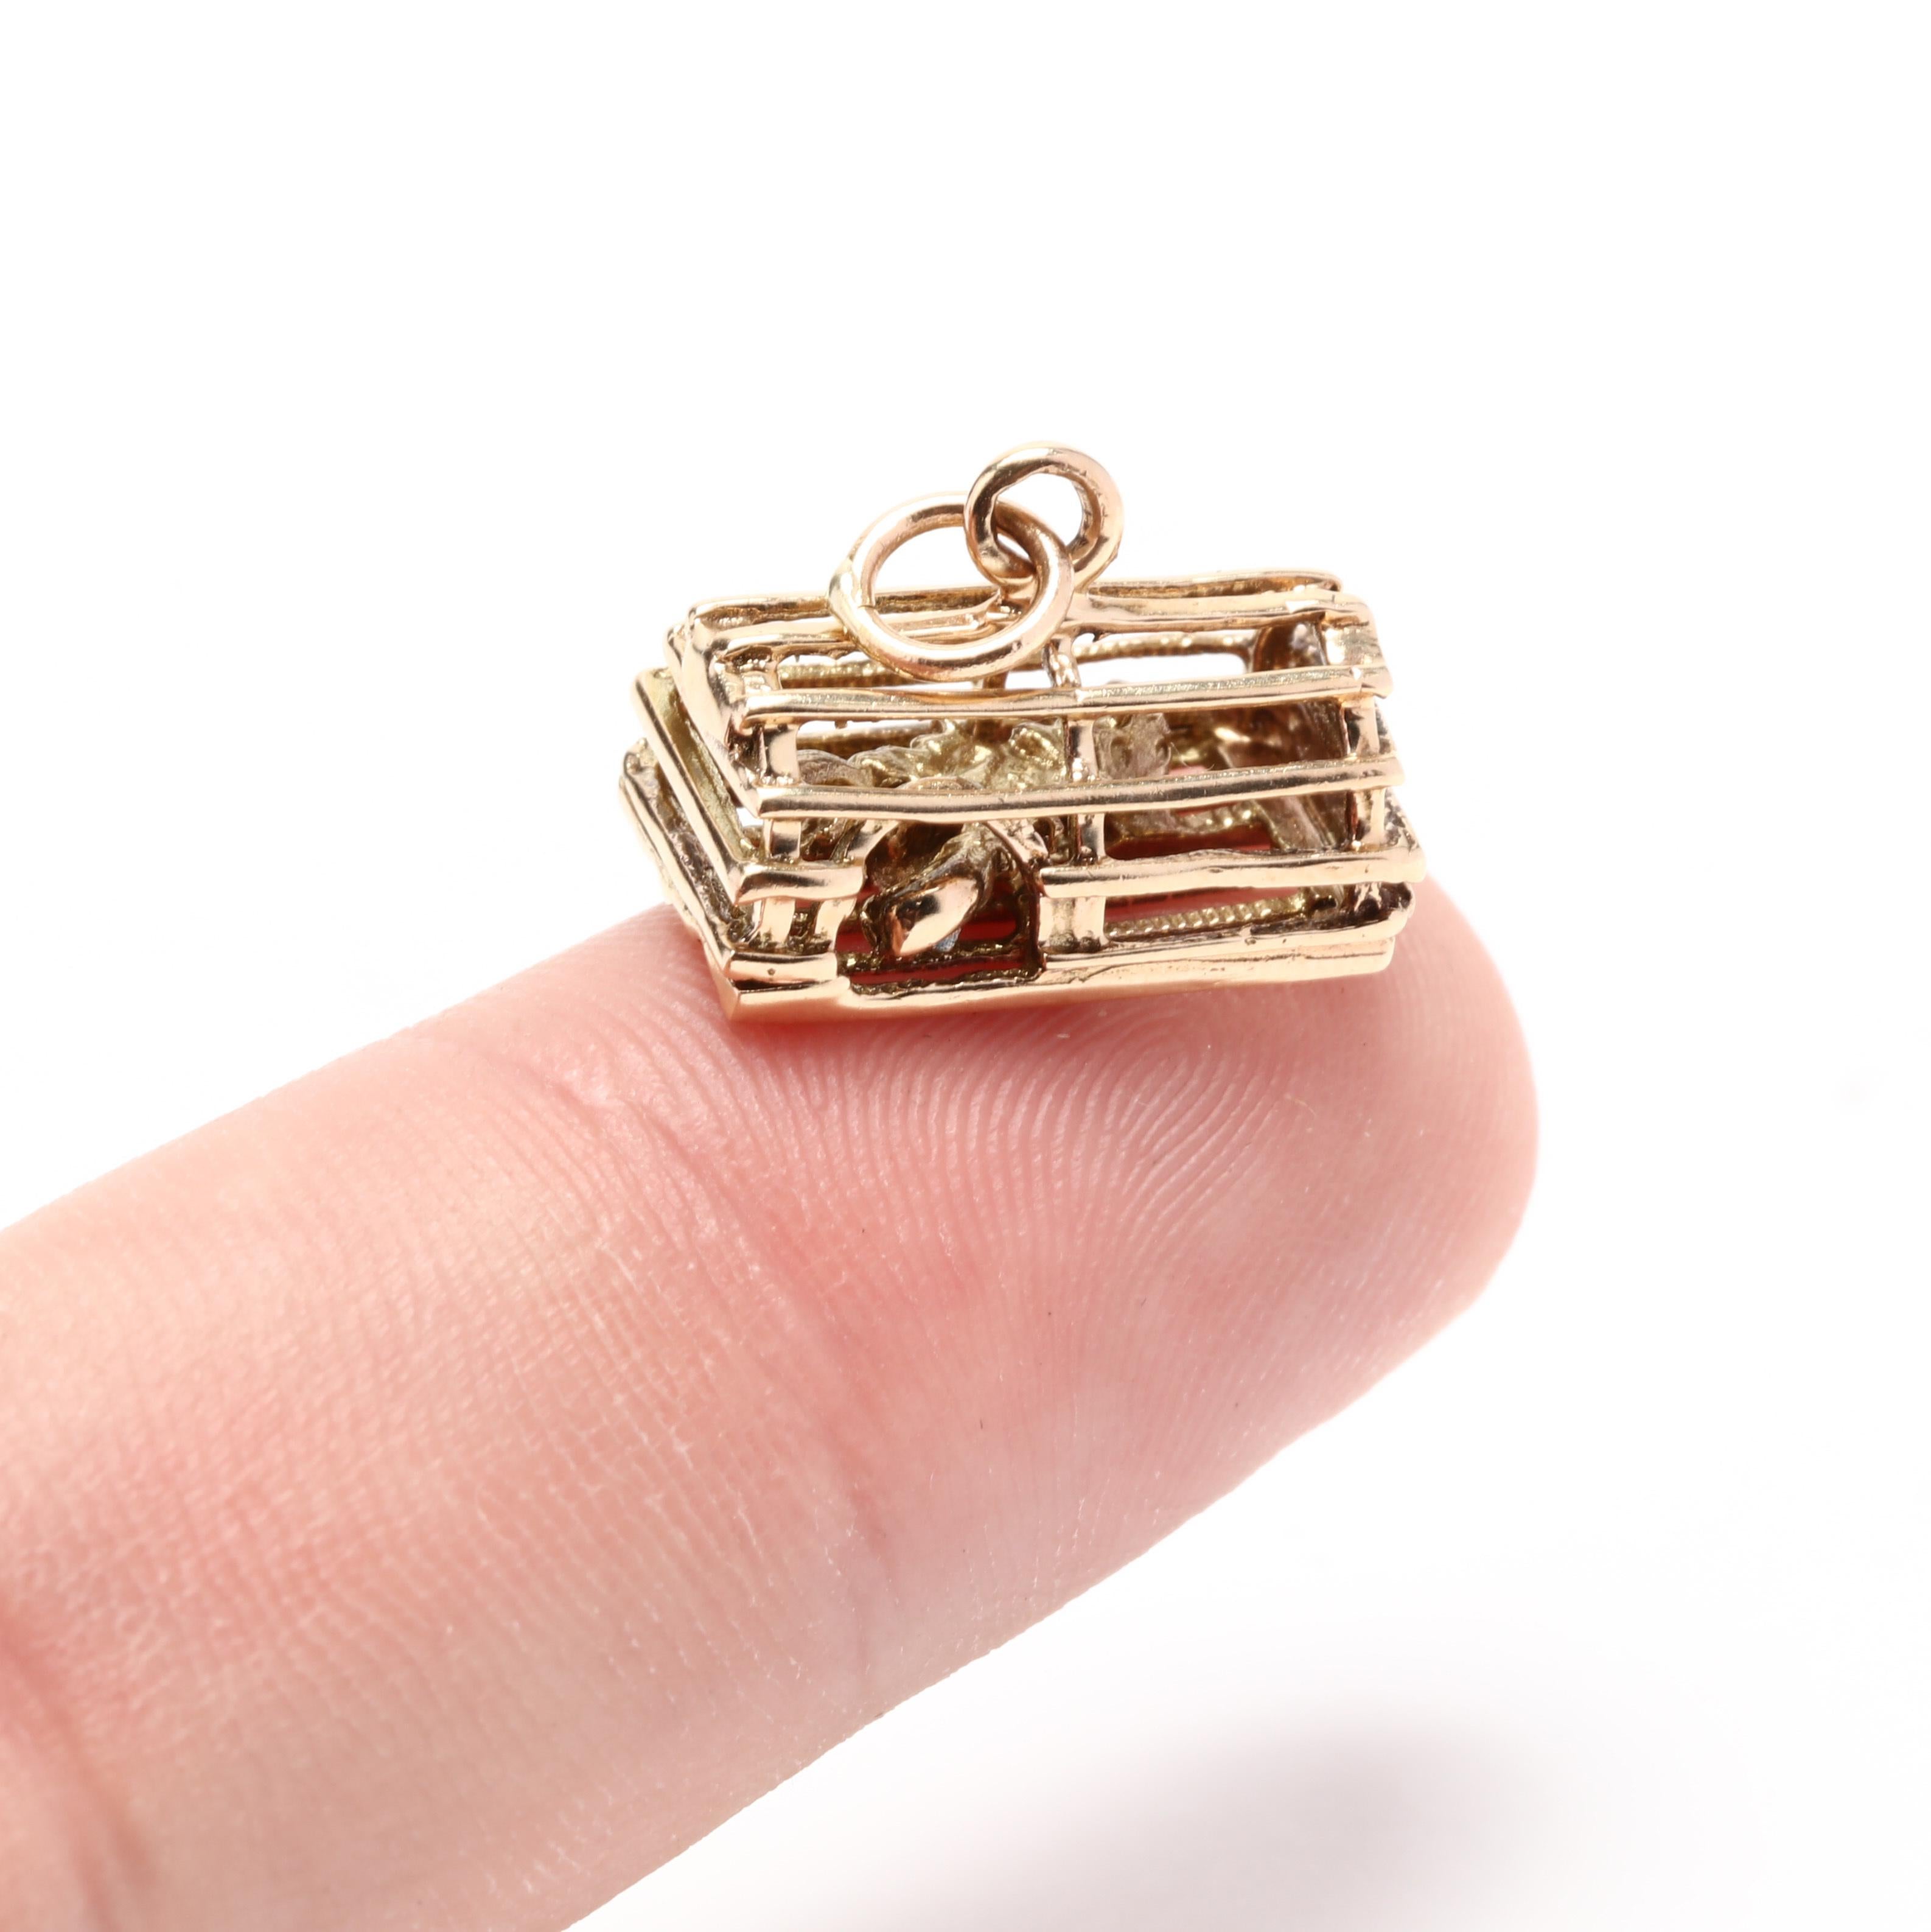 Women's or Men's 14K Lobster in a Cage Charm